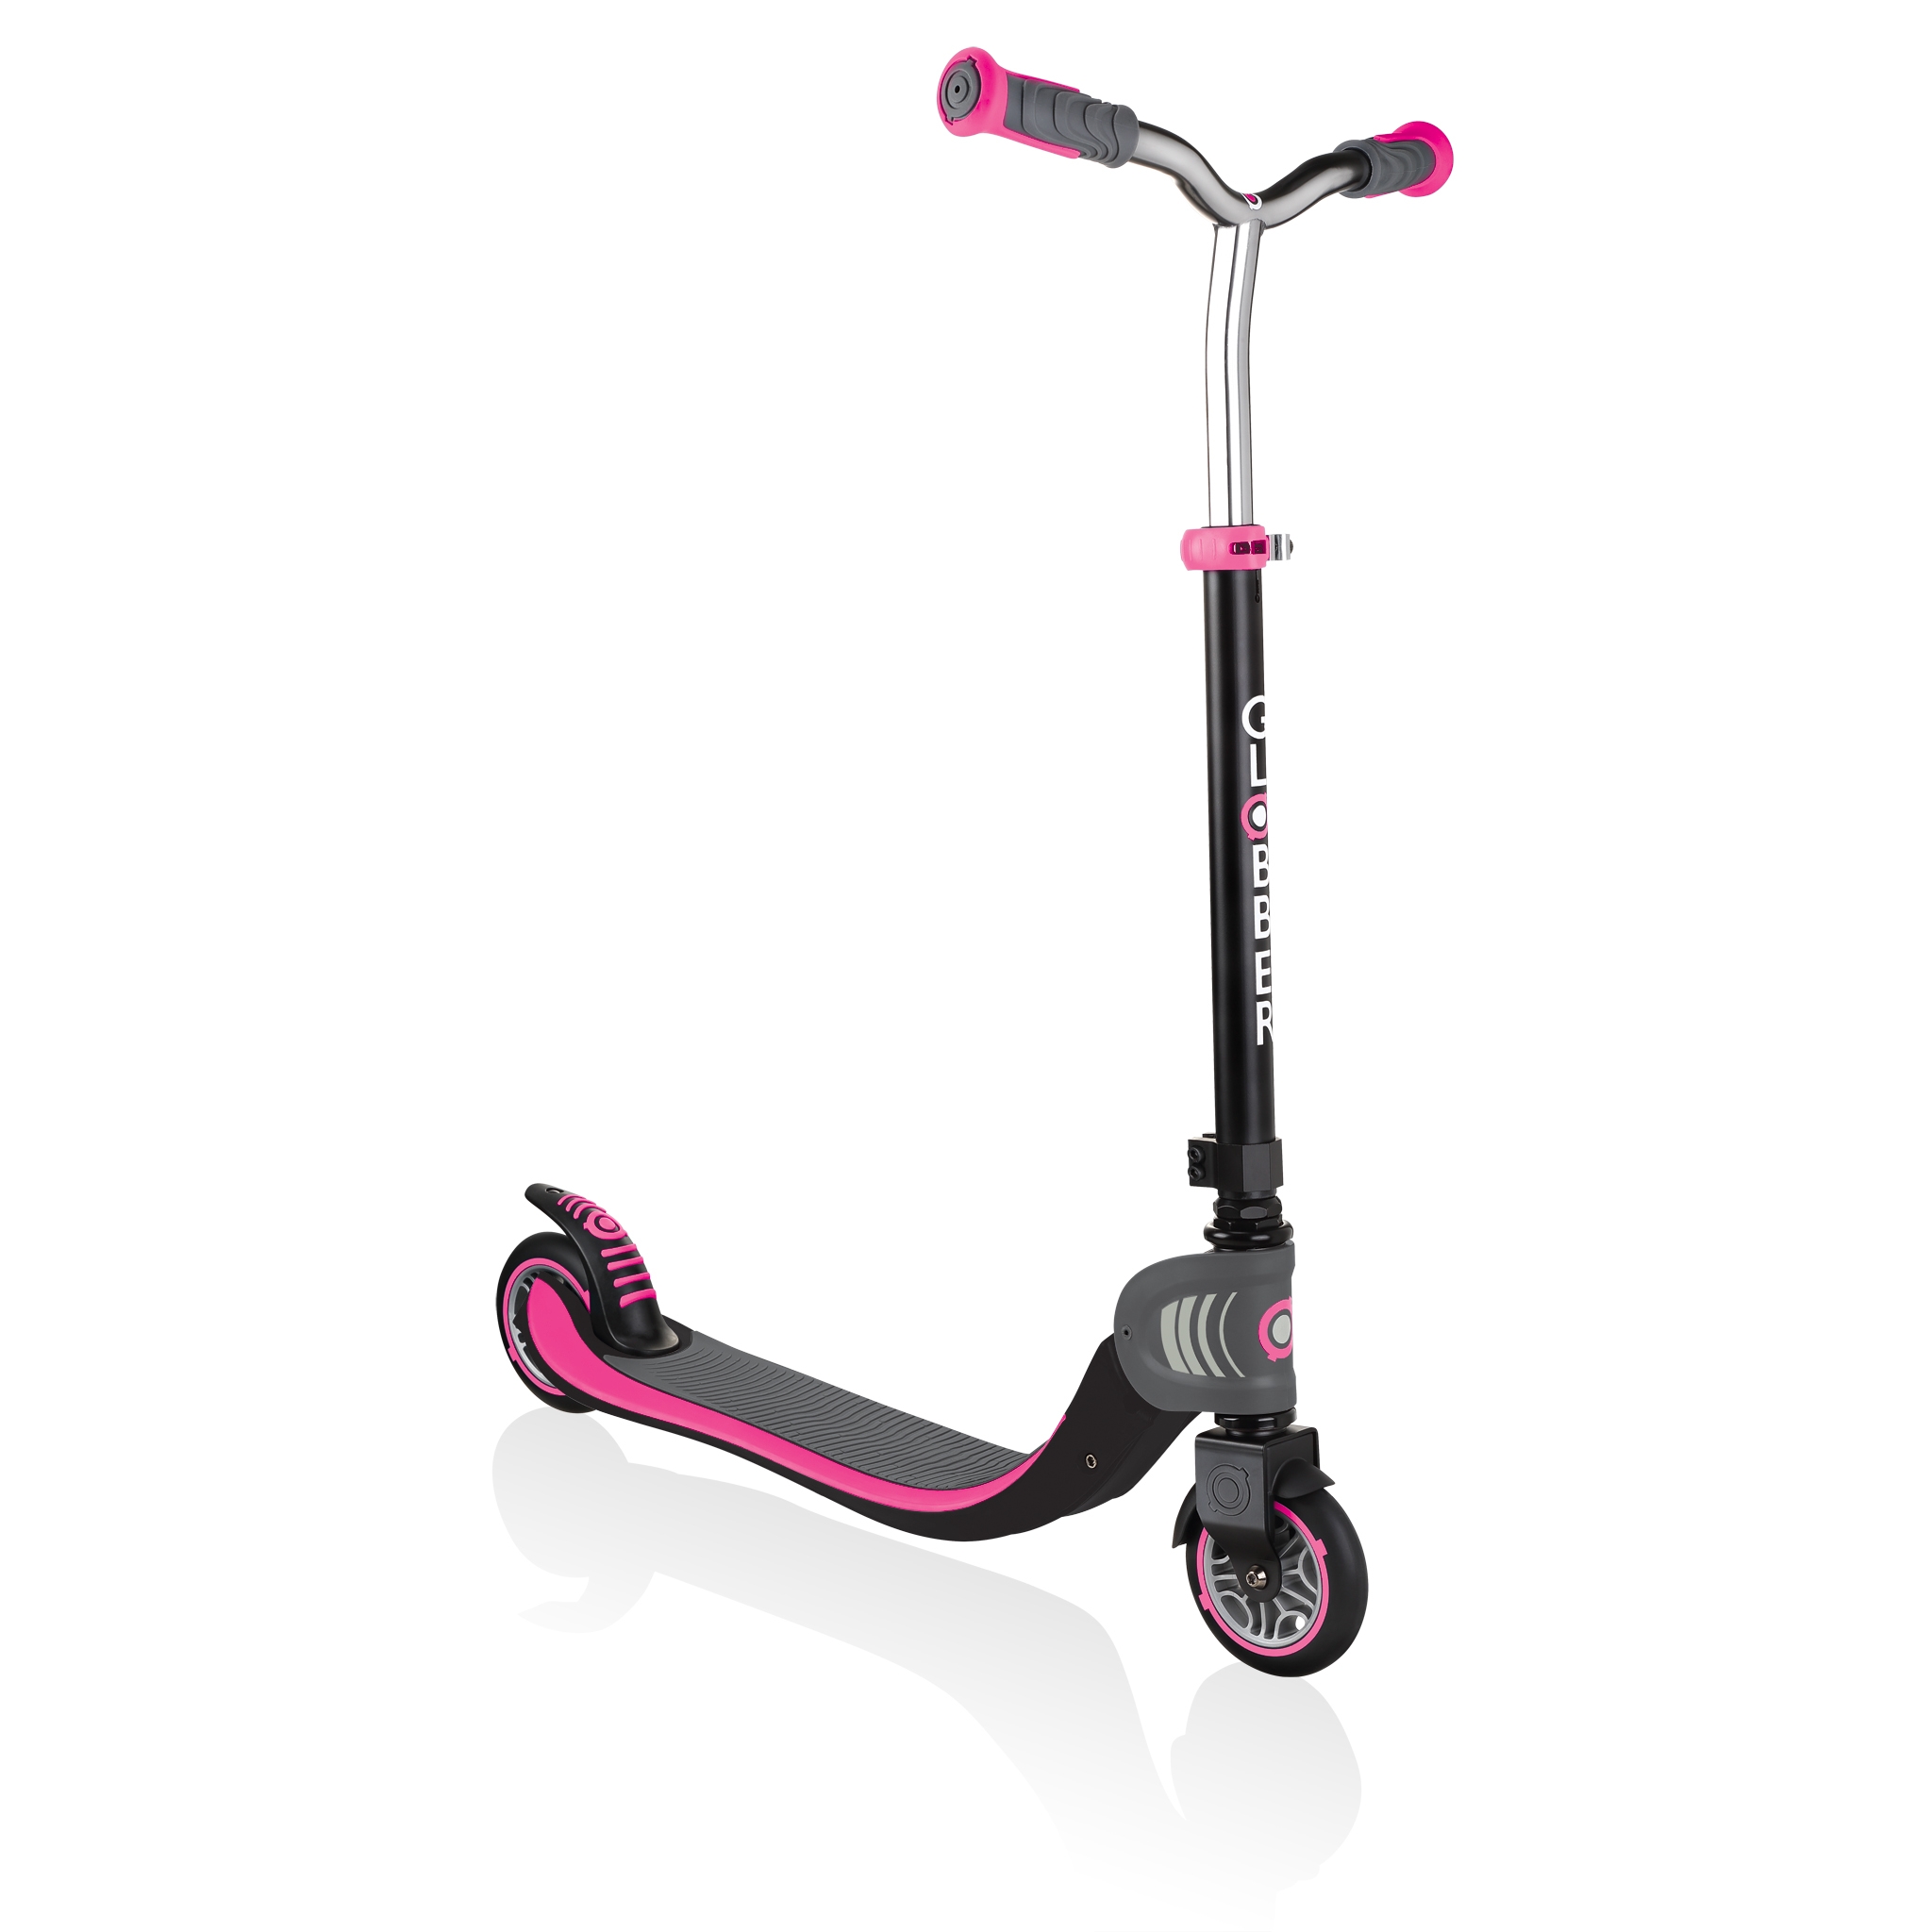 FLOW-FOLDABLE-125-2-wheel-scooter-for-kids-deep-pink 0